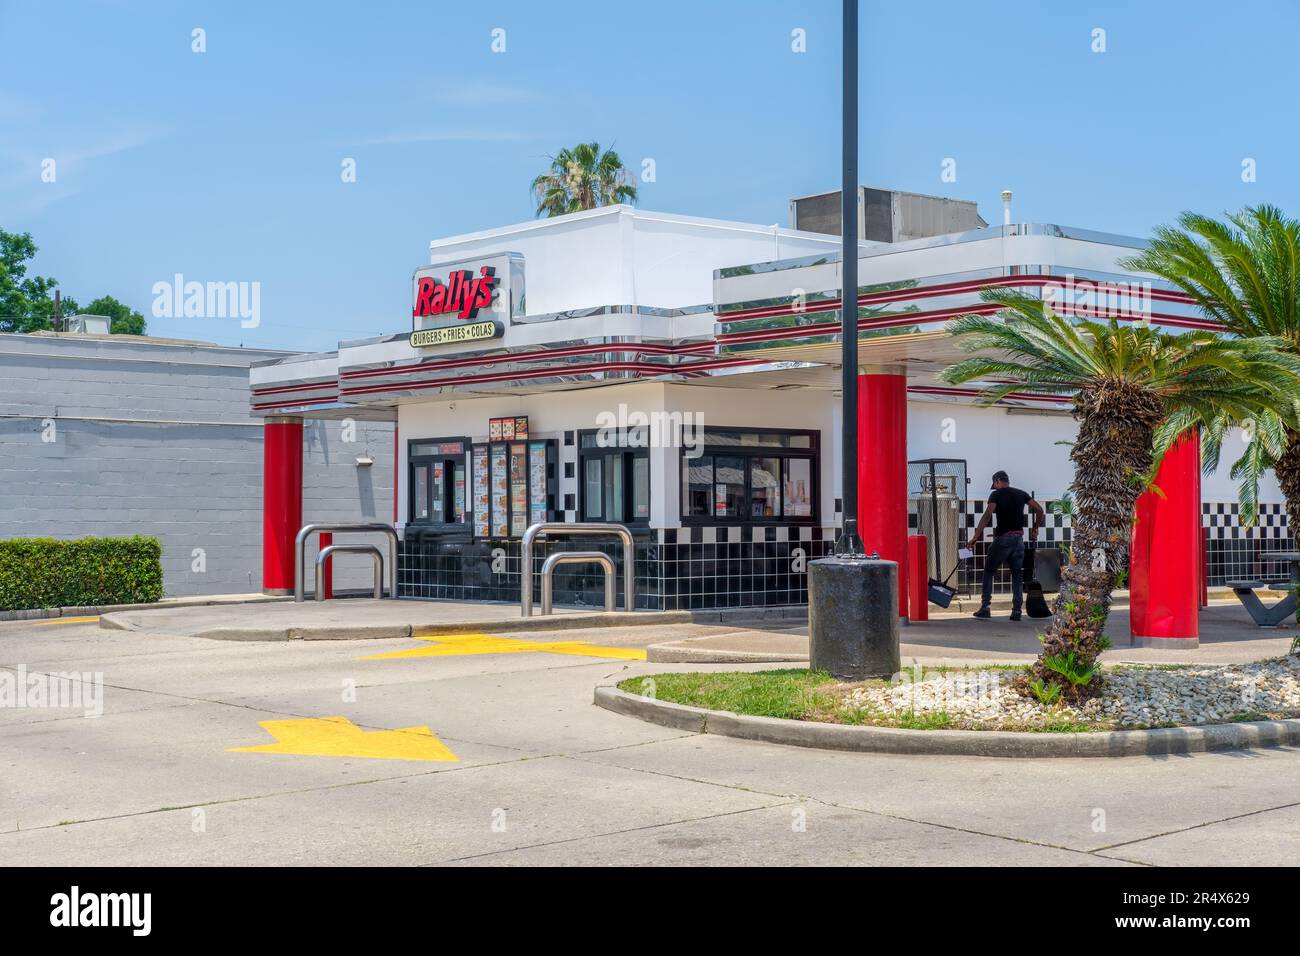 NEW ORLEANS, LA, USA - MAY 28, 2023: Rally's fast food restaurant with worker cleaning drive thru area Stock Photo